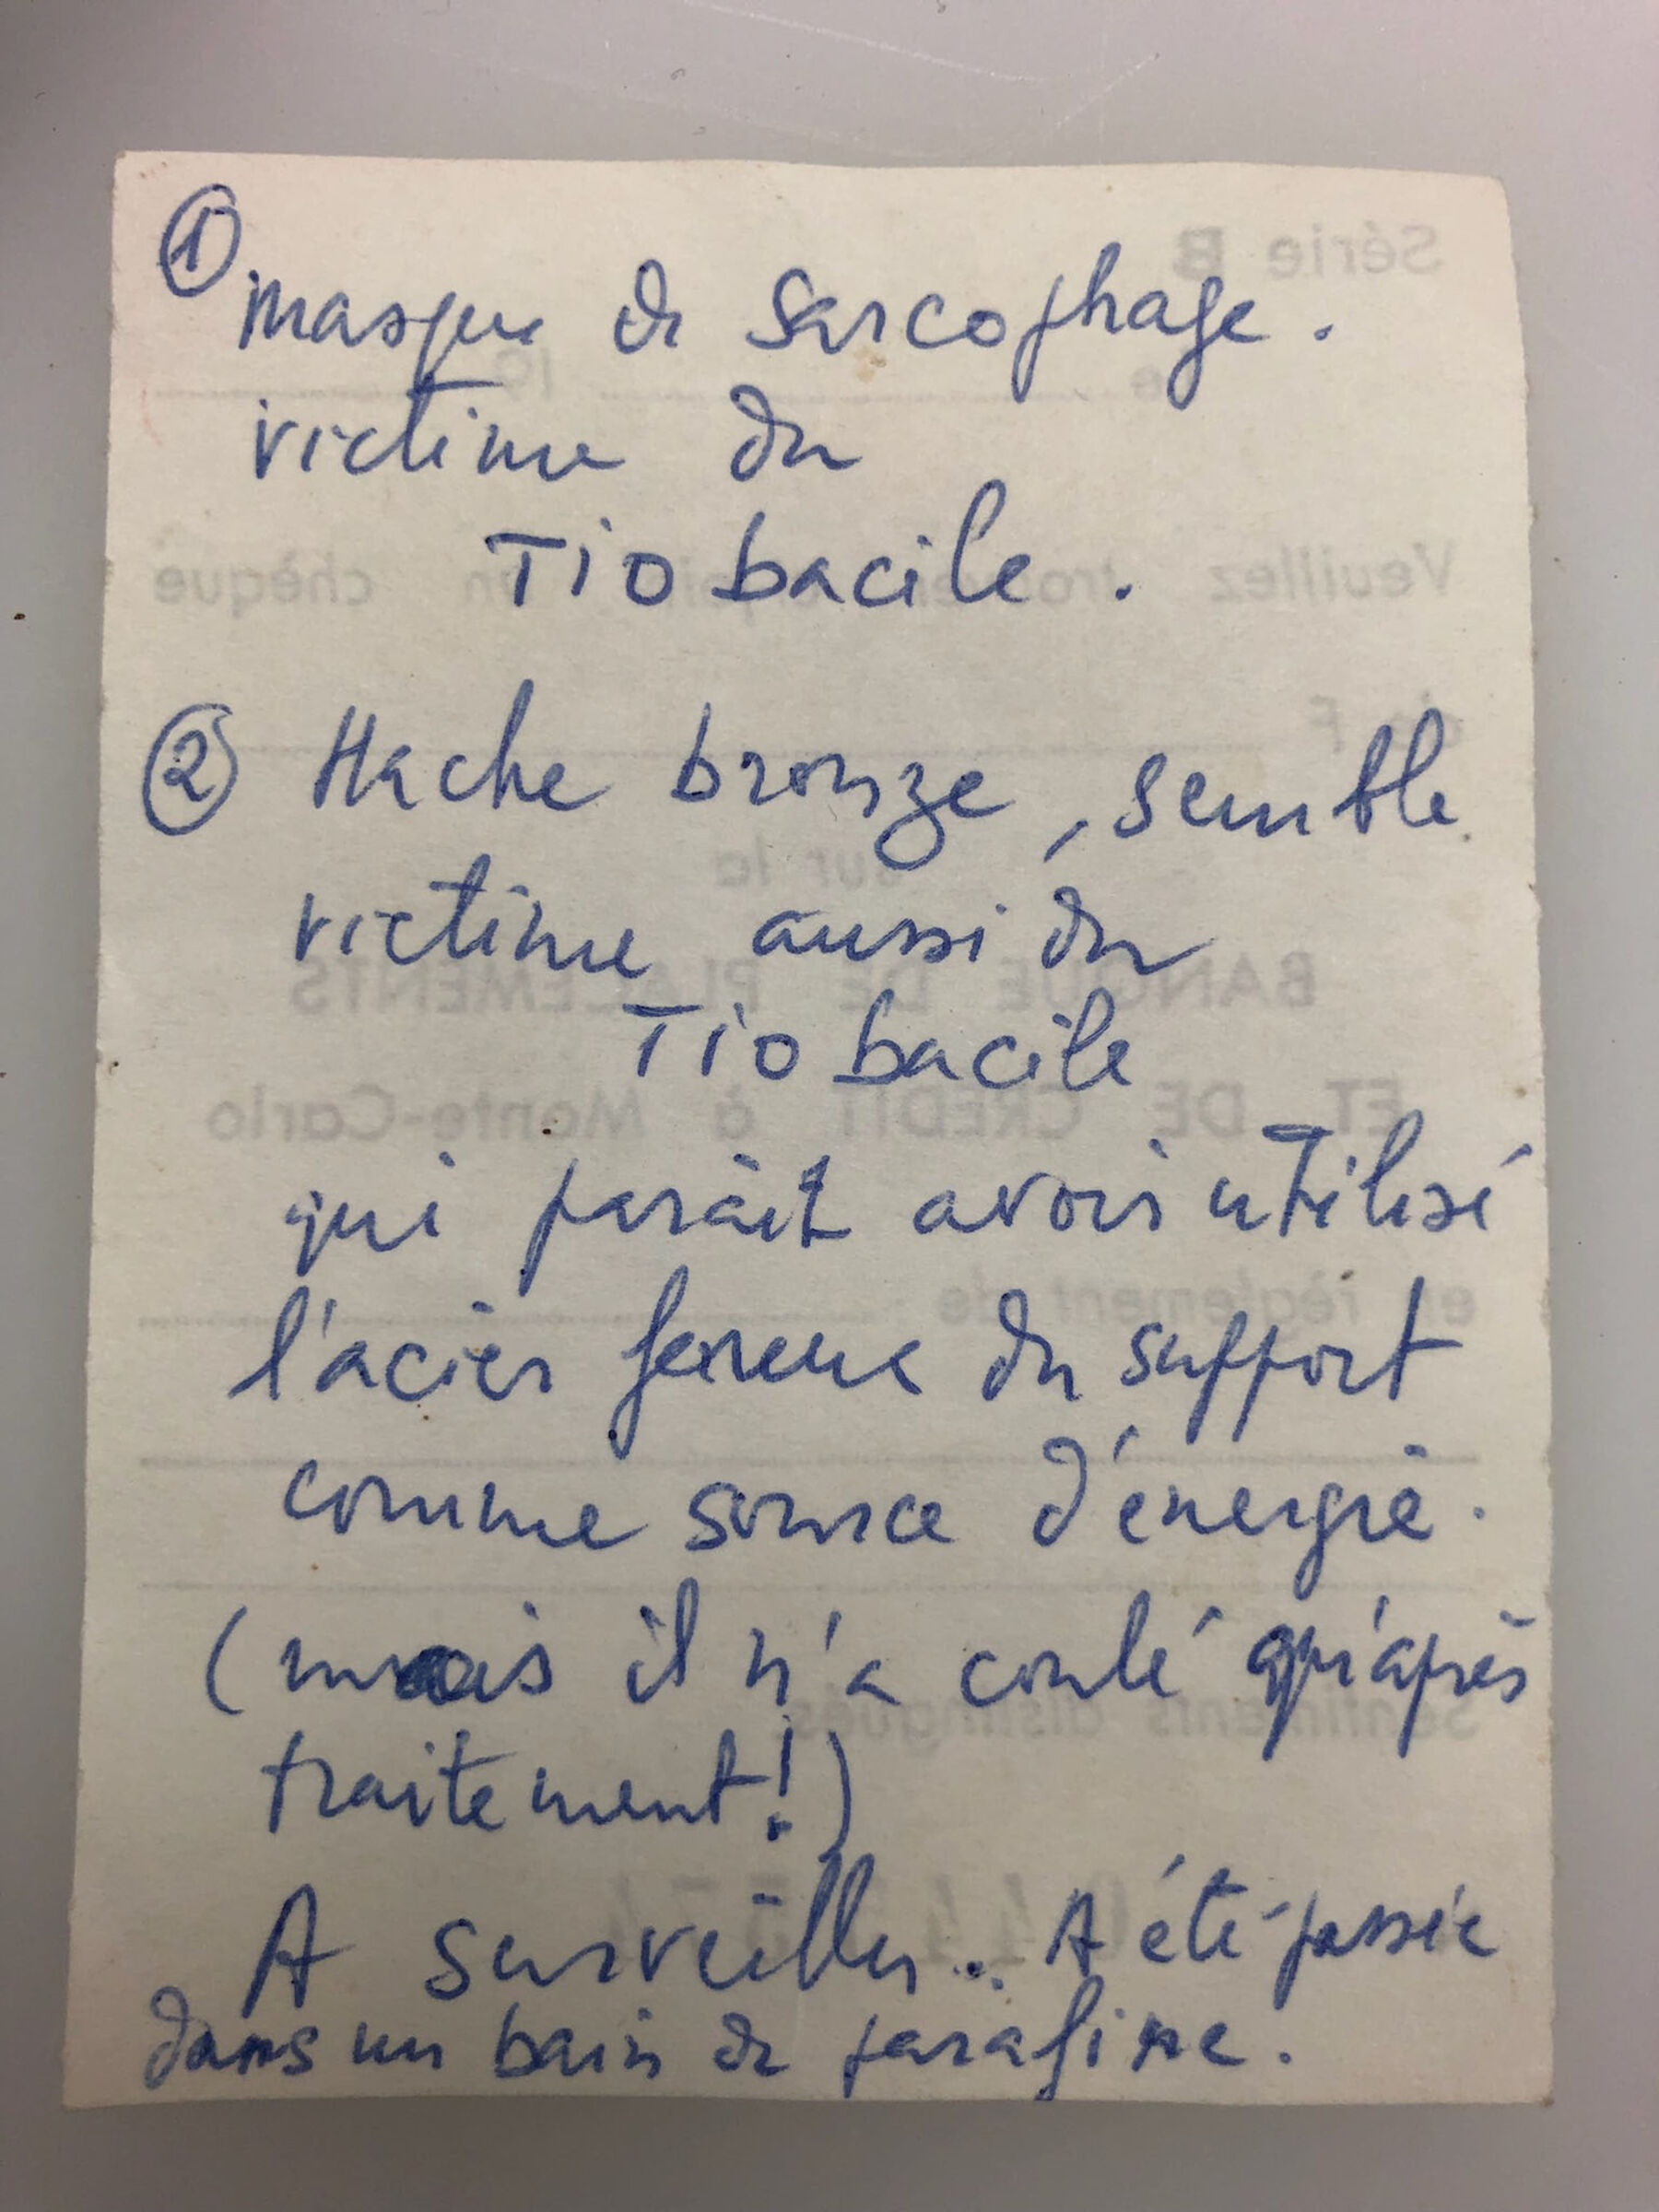 Handwritten note in French referencing corrosion and treatment of a bronze object in the Georges Ricard collection.